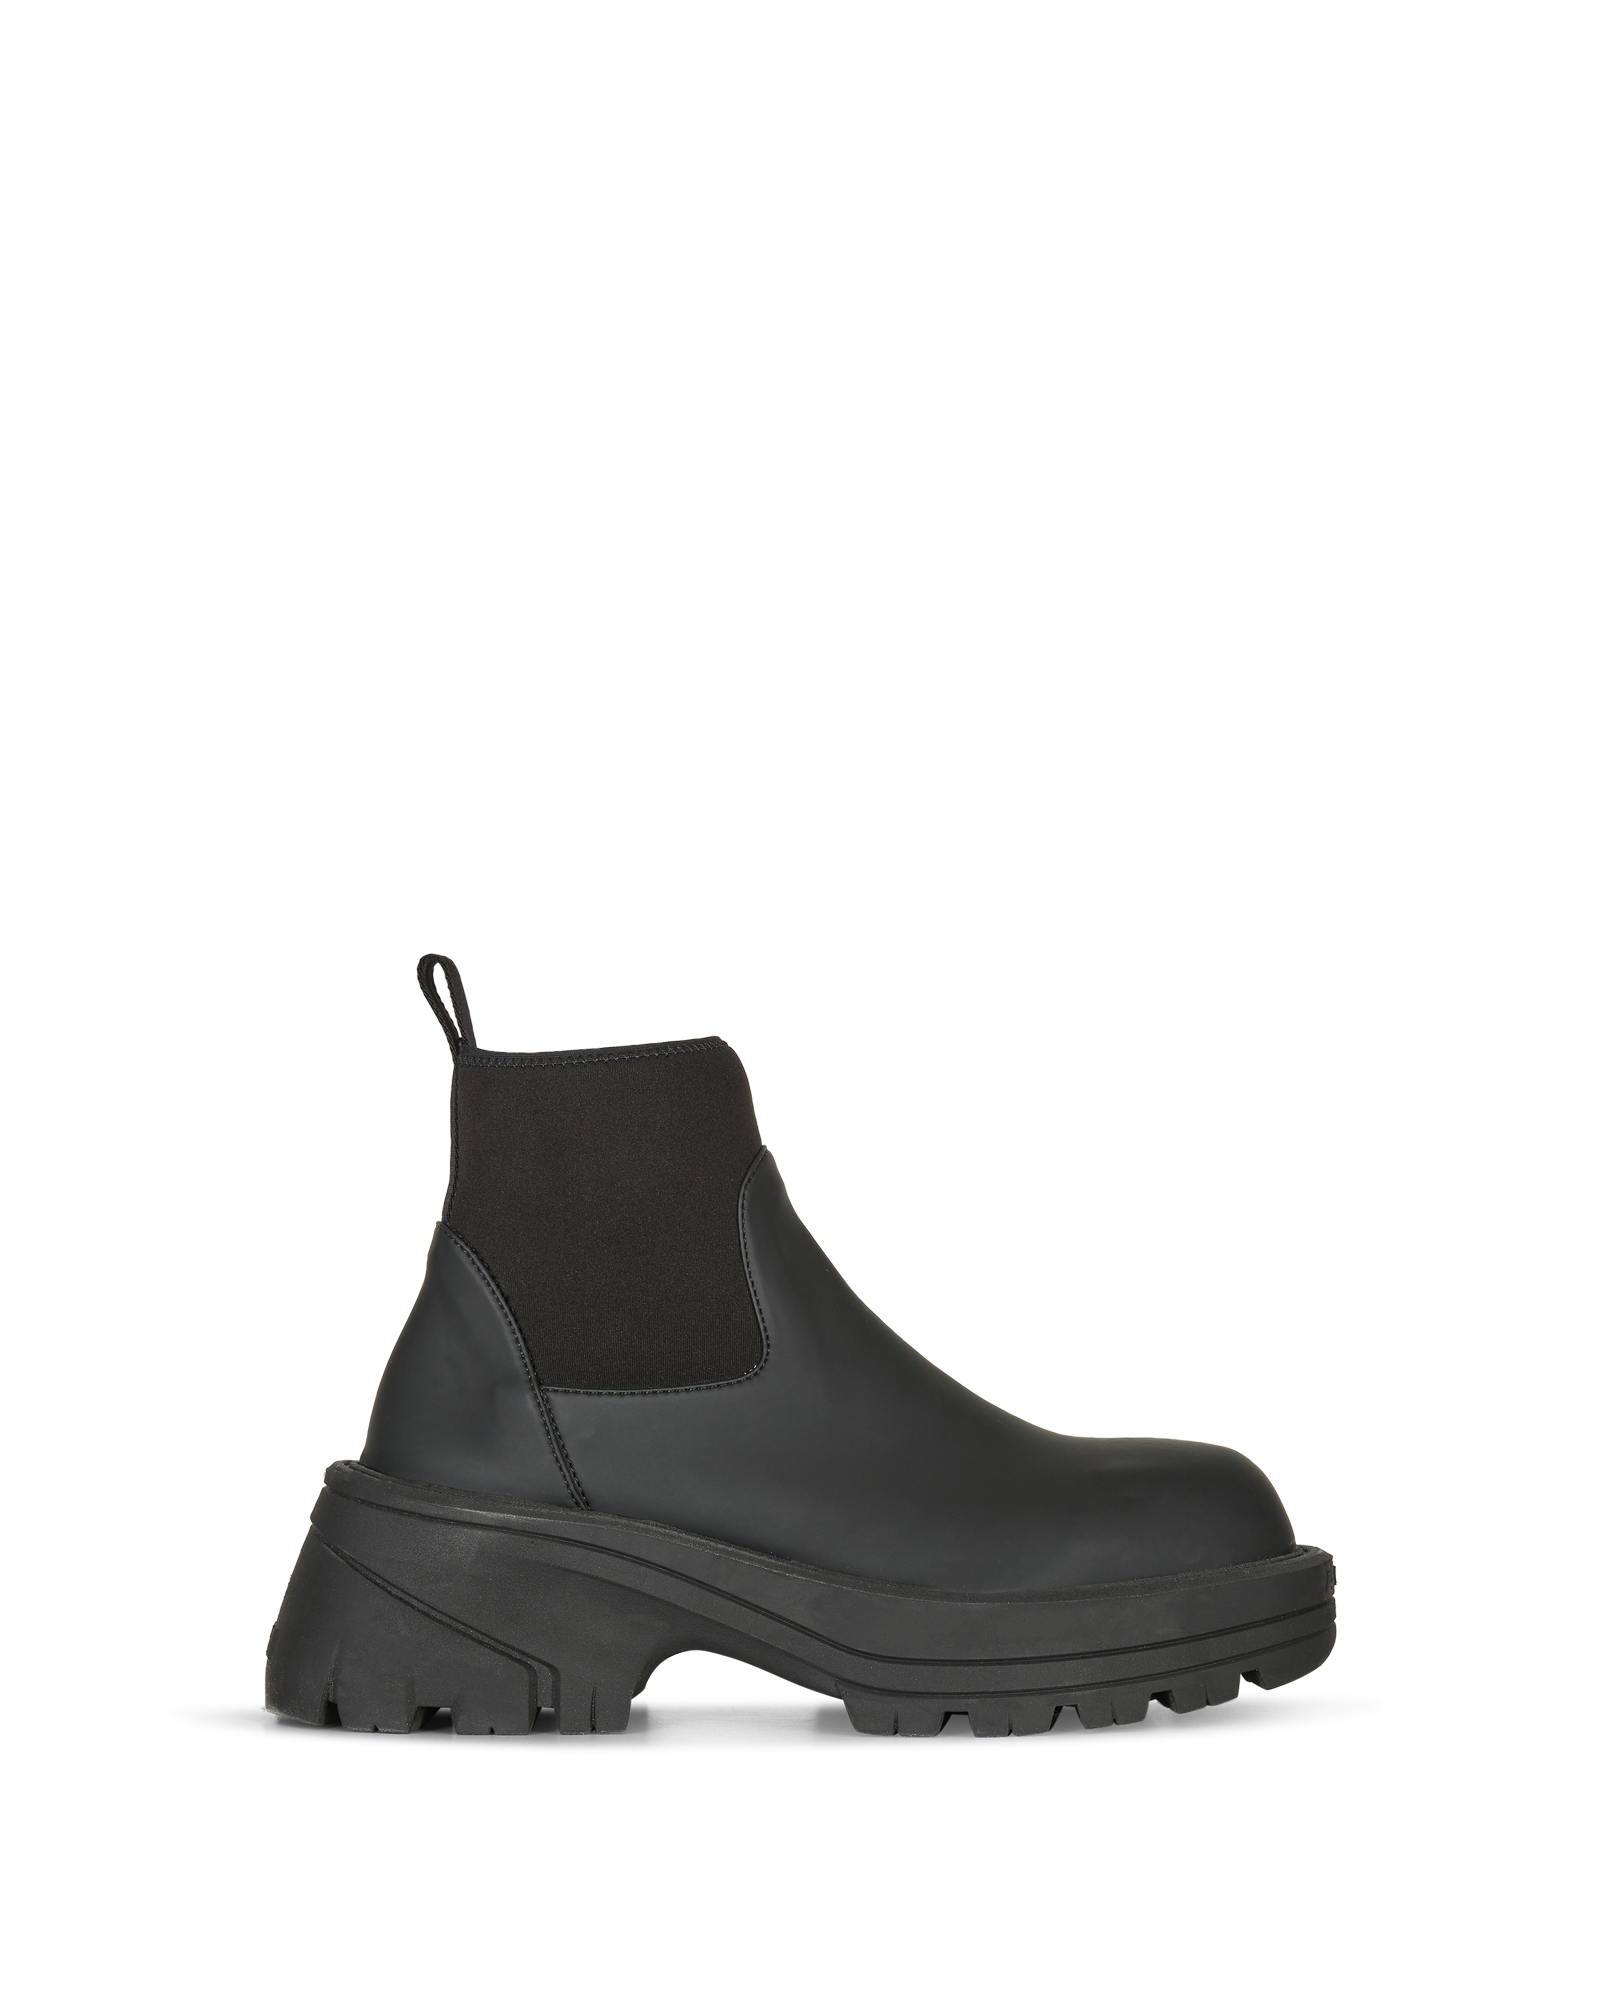 1017 ALYX 9SM | WORK BOOT | BOOTS